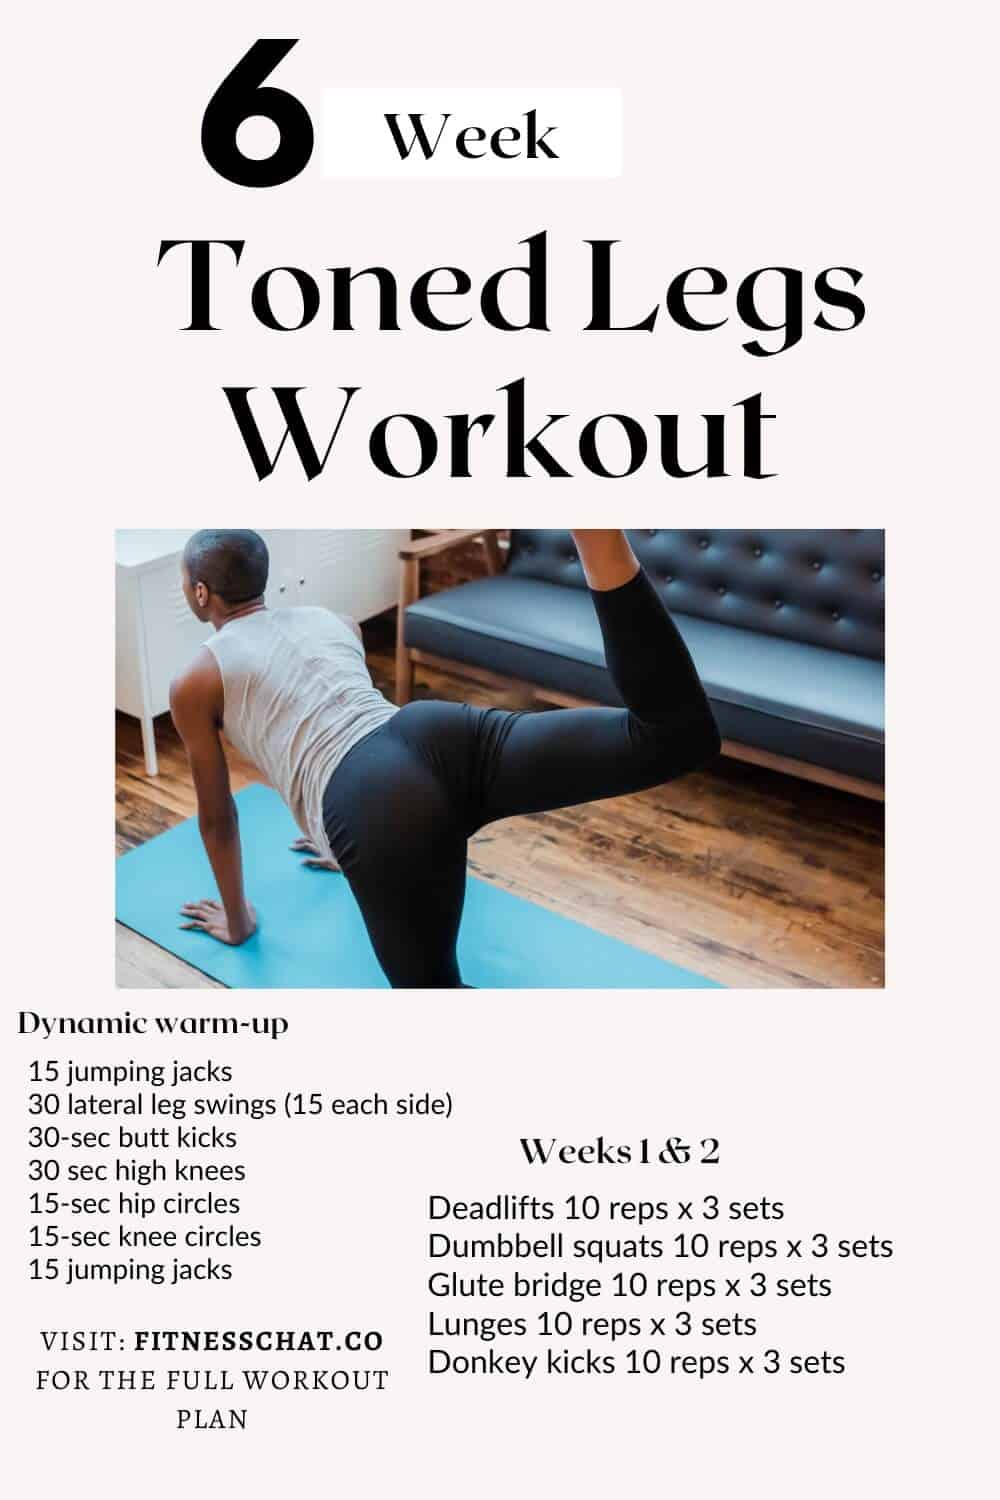 Toned legs workout